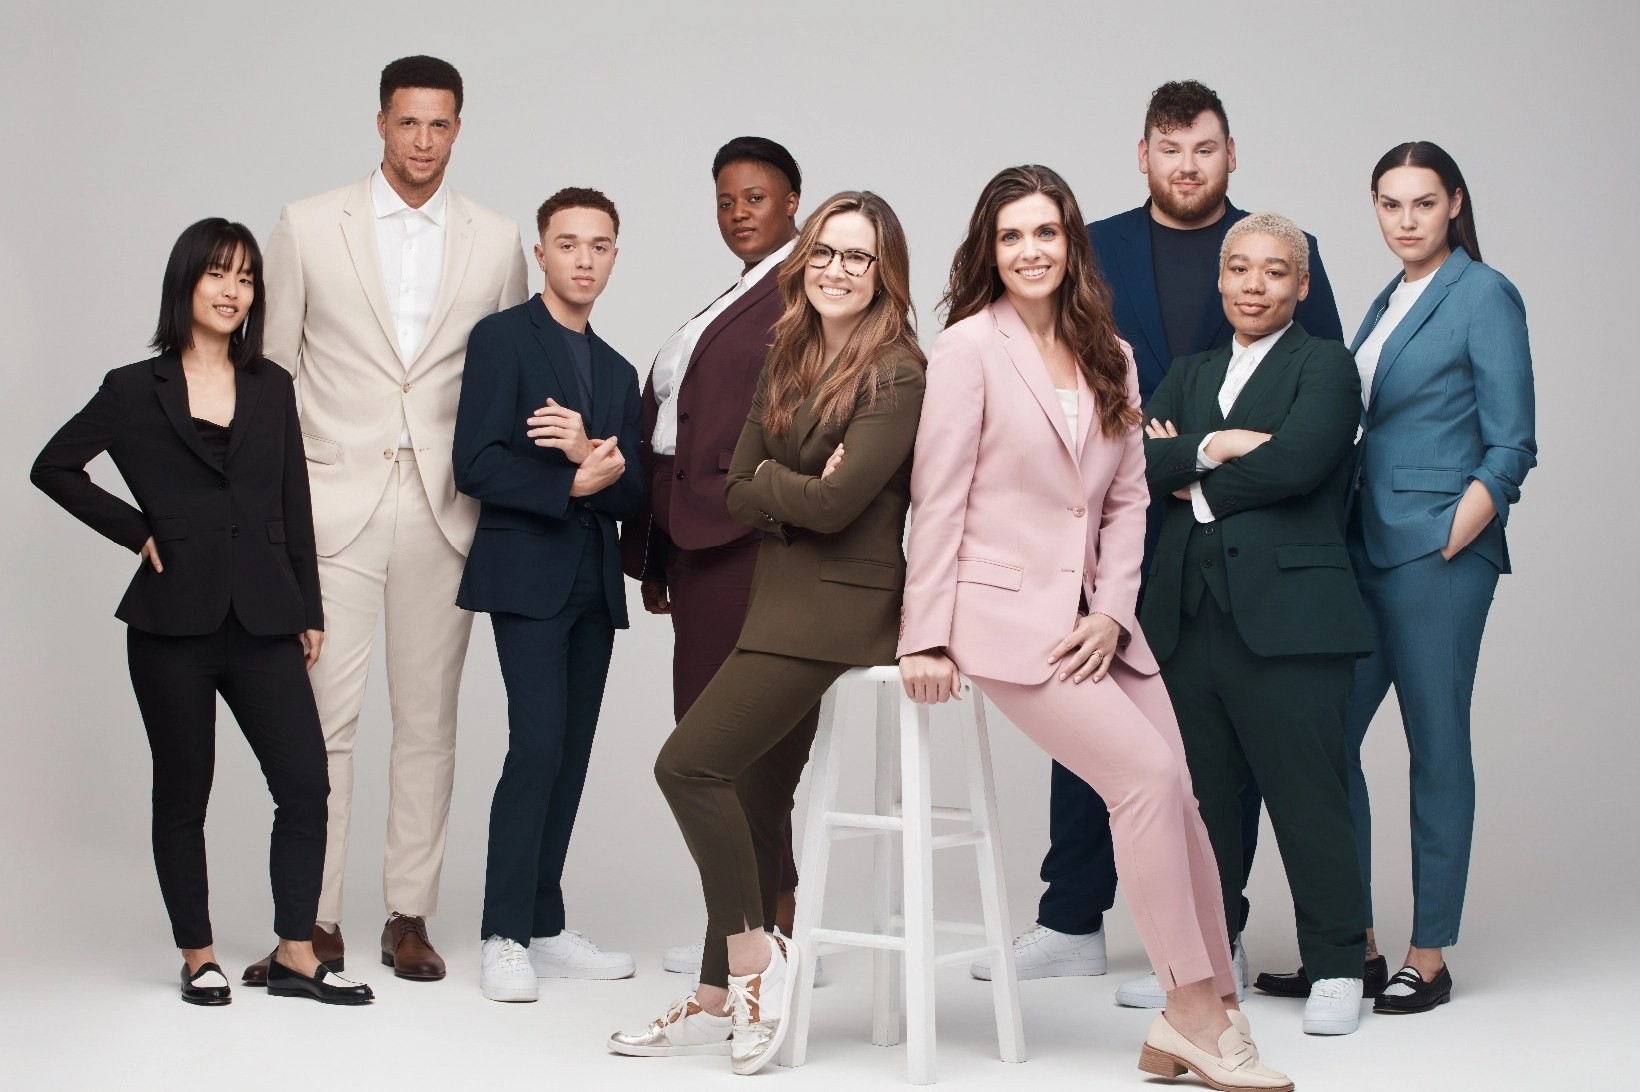 Men, women, and nonbinary models in exciting suit colors like mauve, light pink, and olive suits for petite and plus size suits.